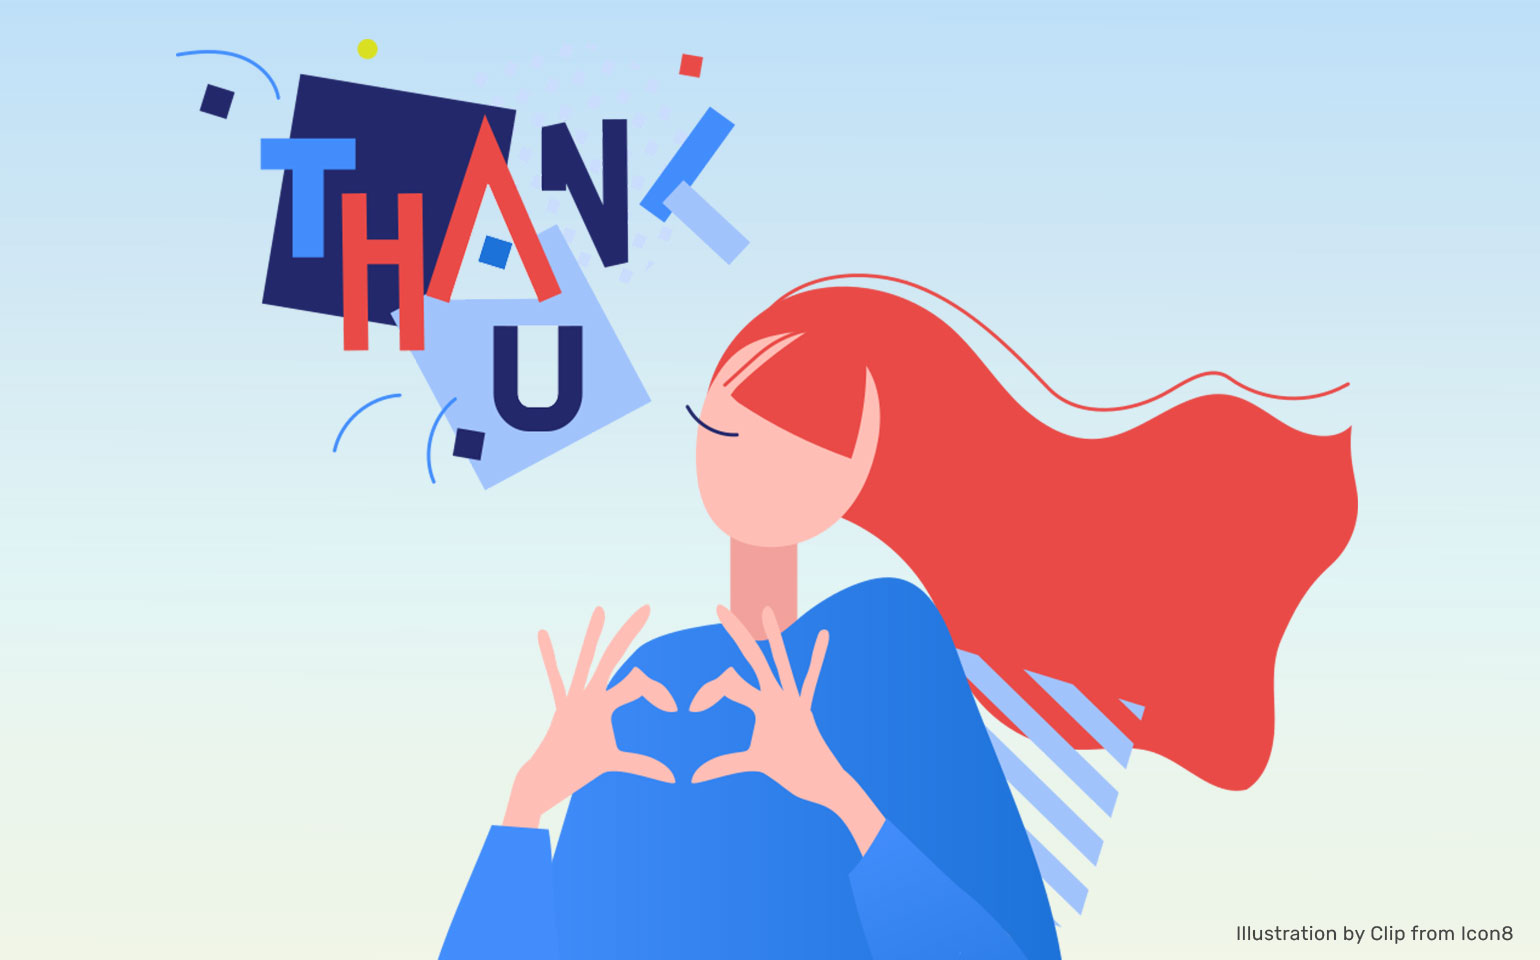 A person is pictured with the words "Thank U" above their head, showing how reciprocation matters.